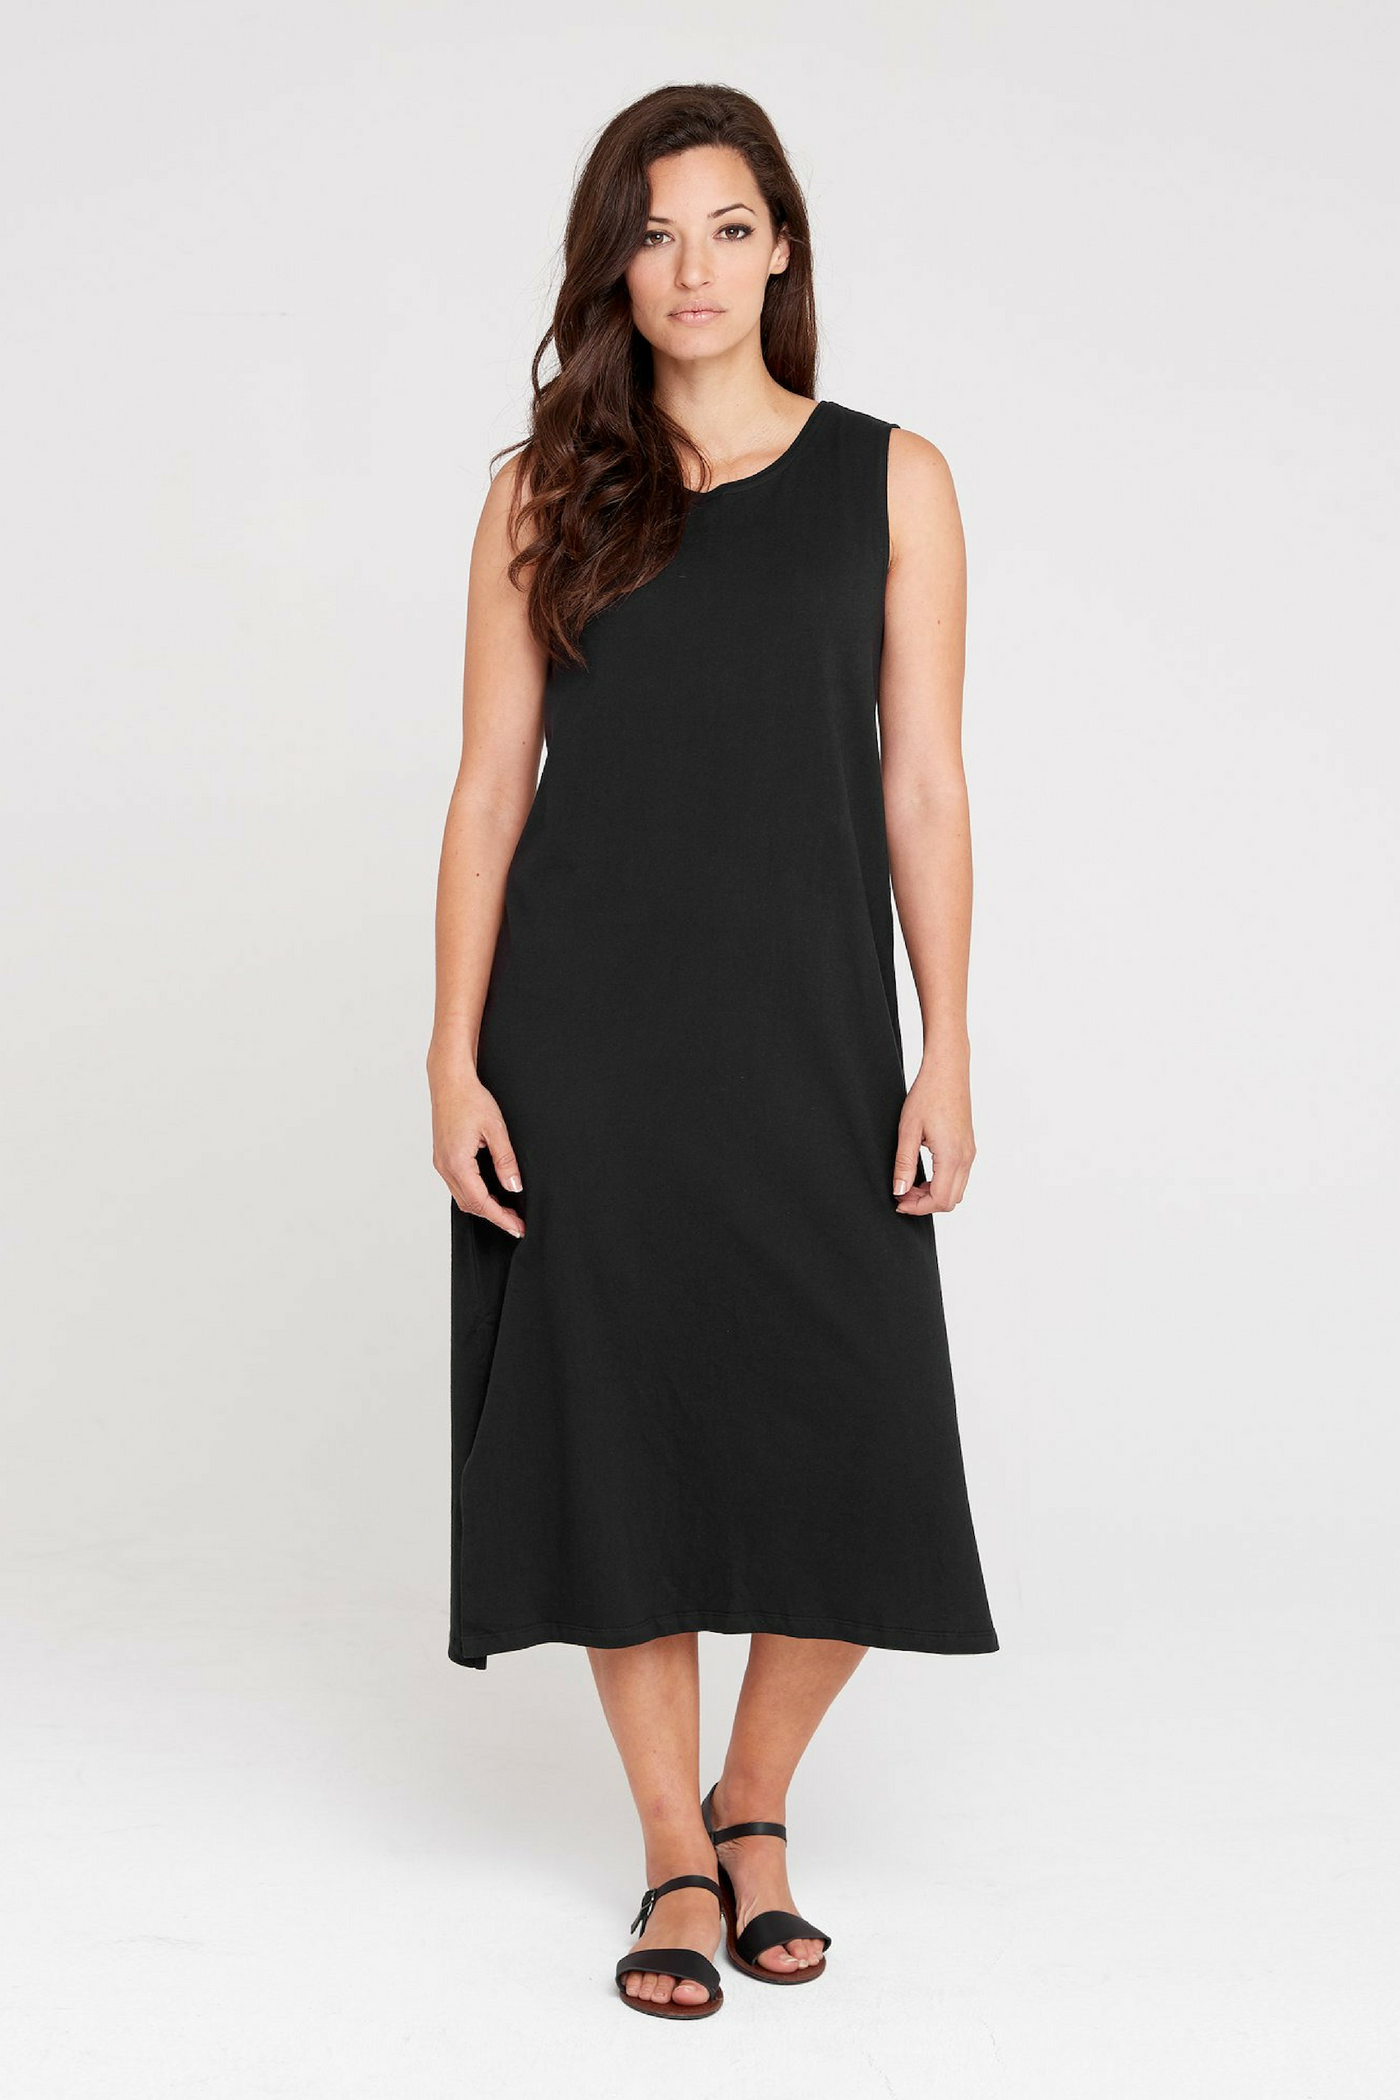 Dorsu Relaxed Tank Dress in Black, available on ZERRIN